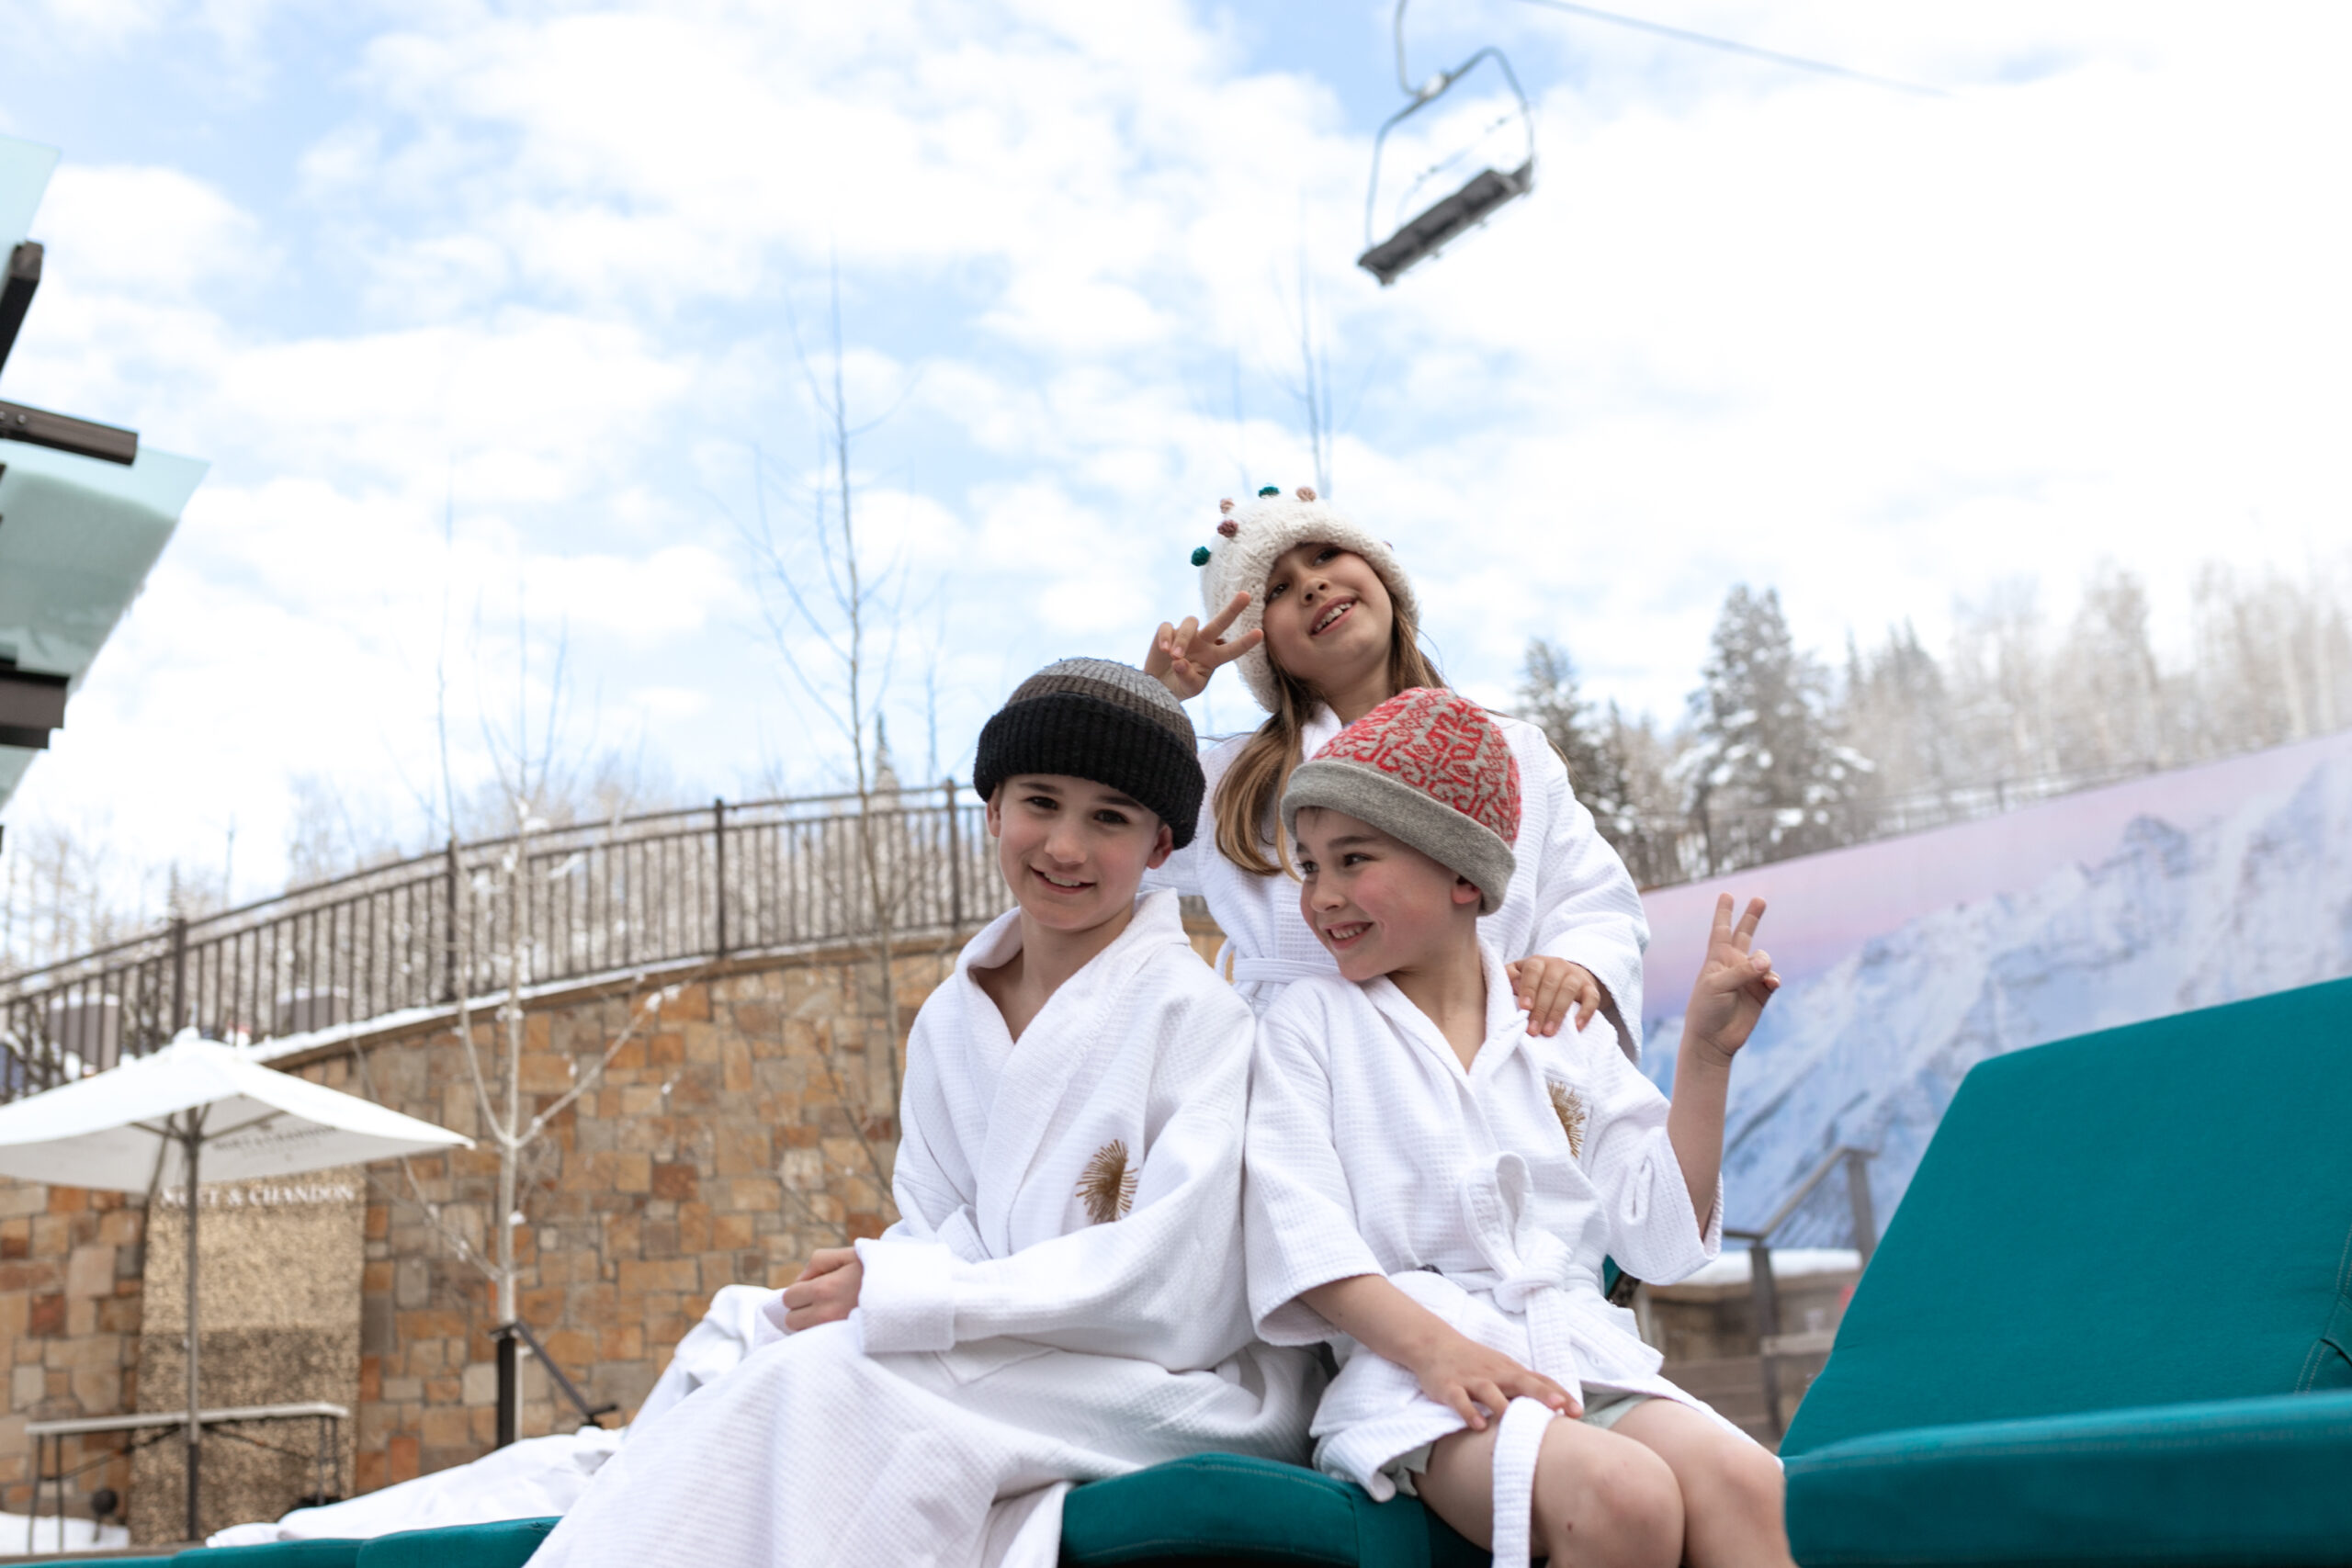 the kids ready to hit the heated pool and hot tub after a long day skiing at the viceroy snowmass #apresski #familytravel